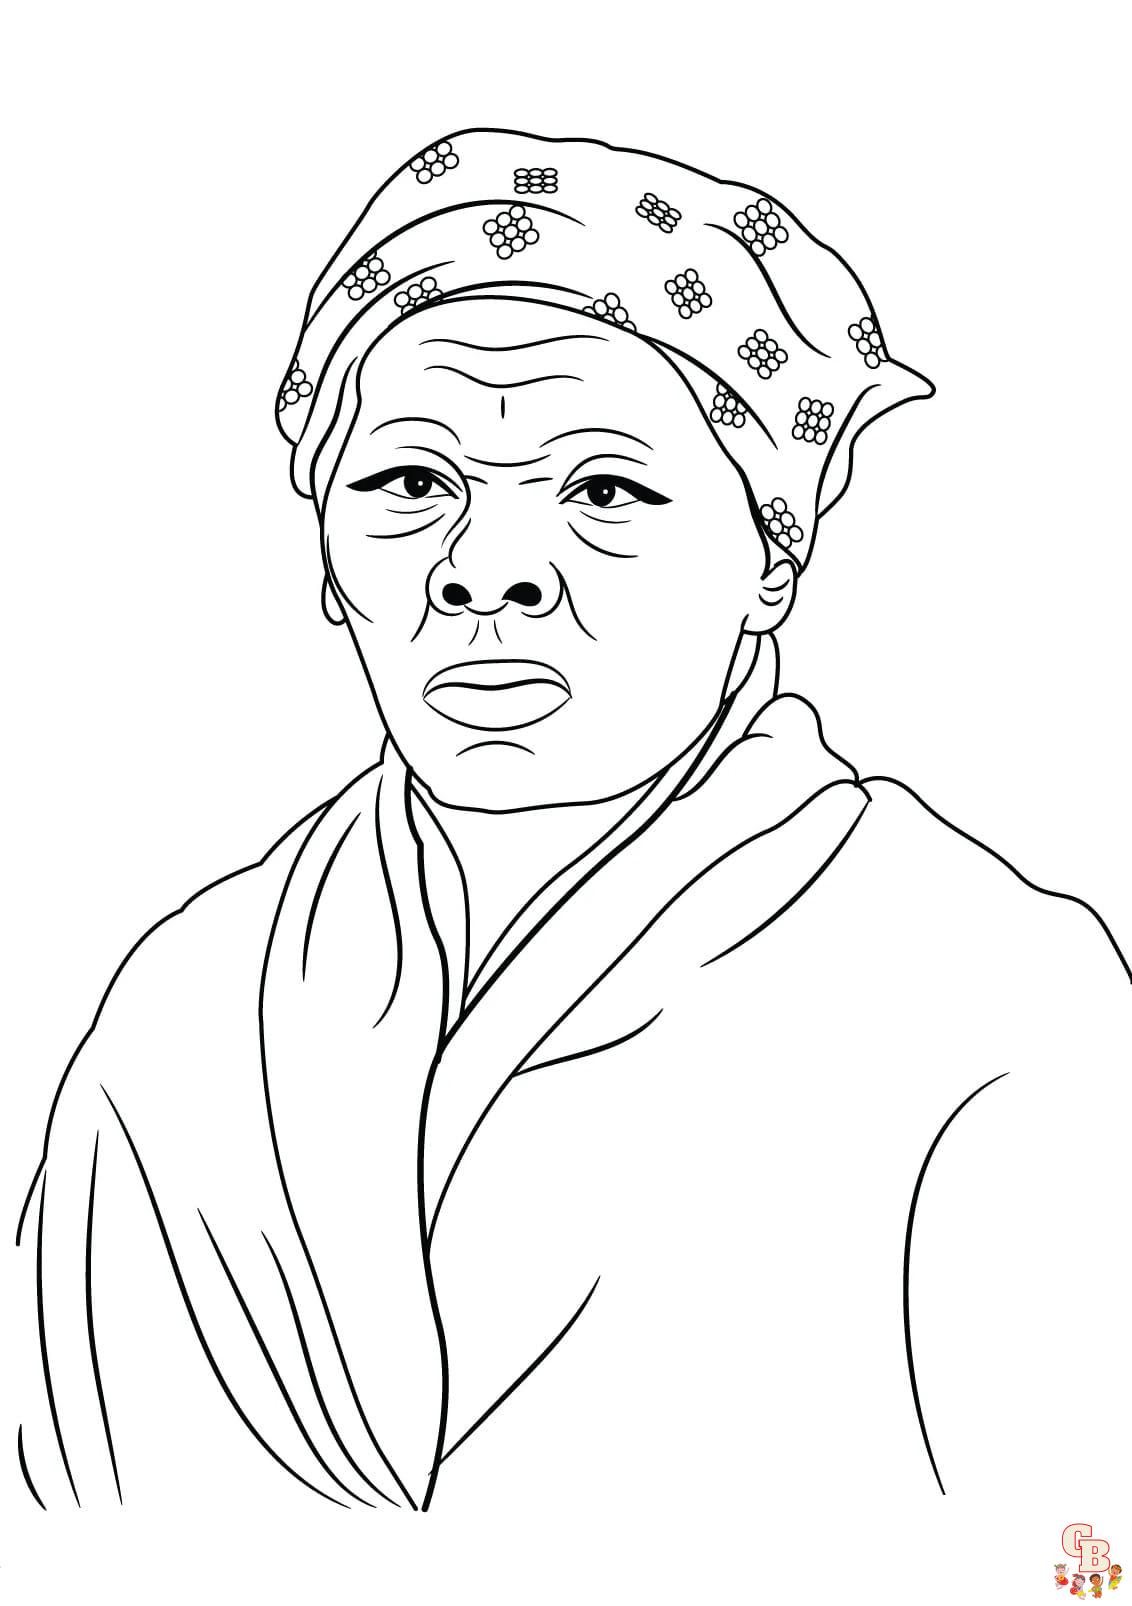 Harriet Tubman coloring pages printable